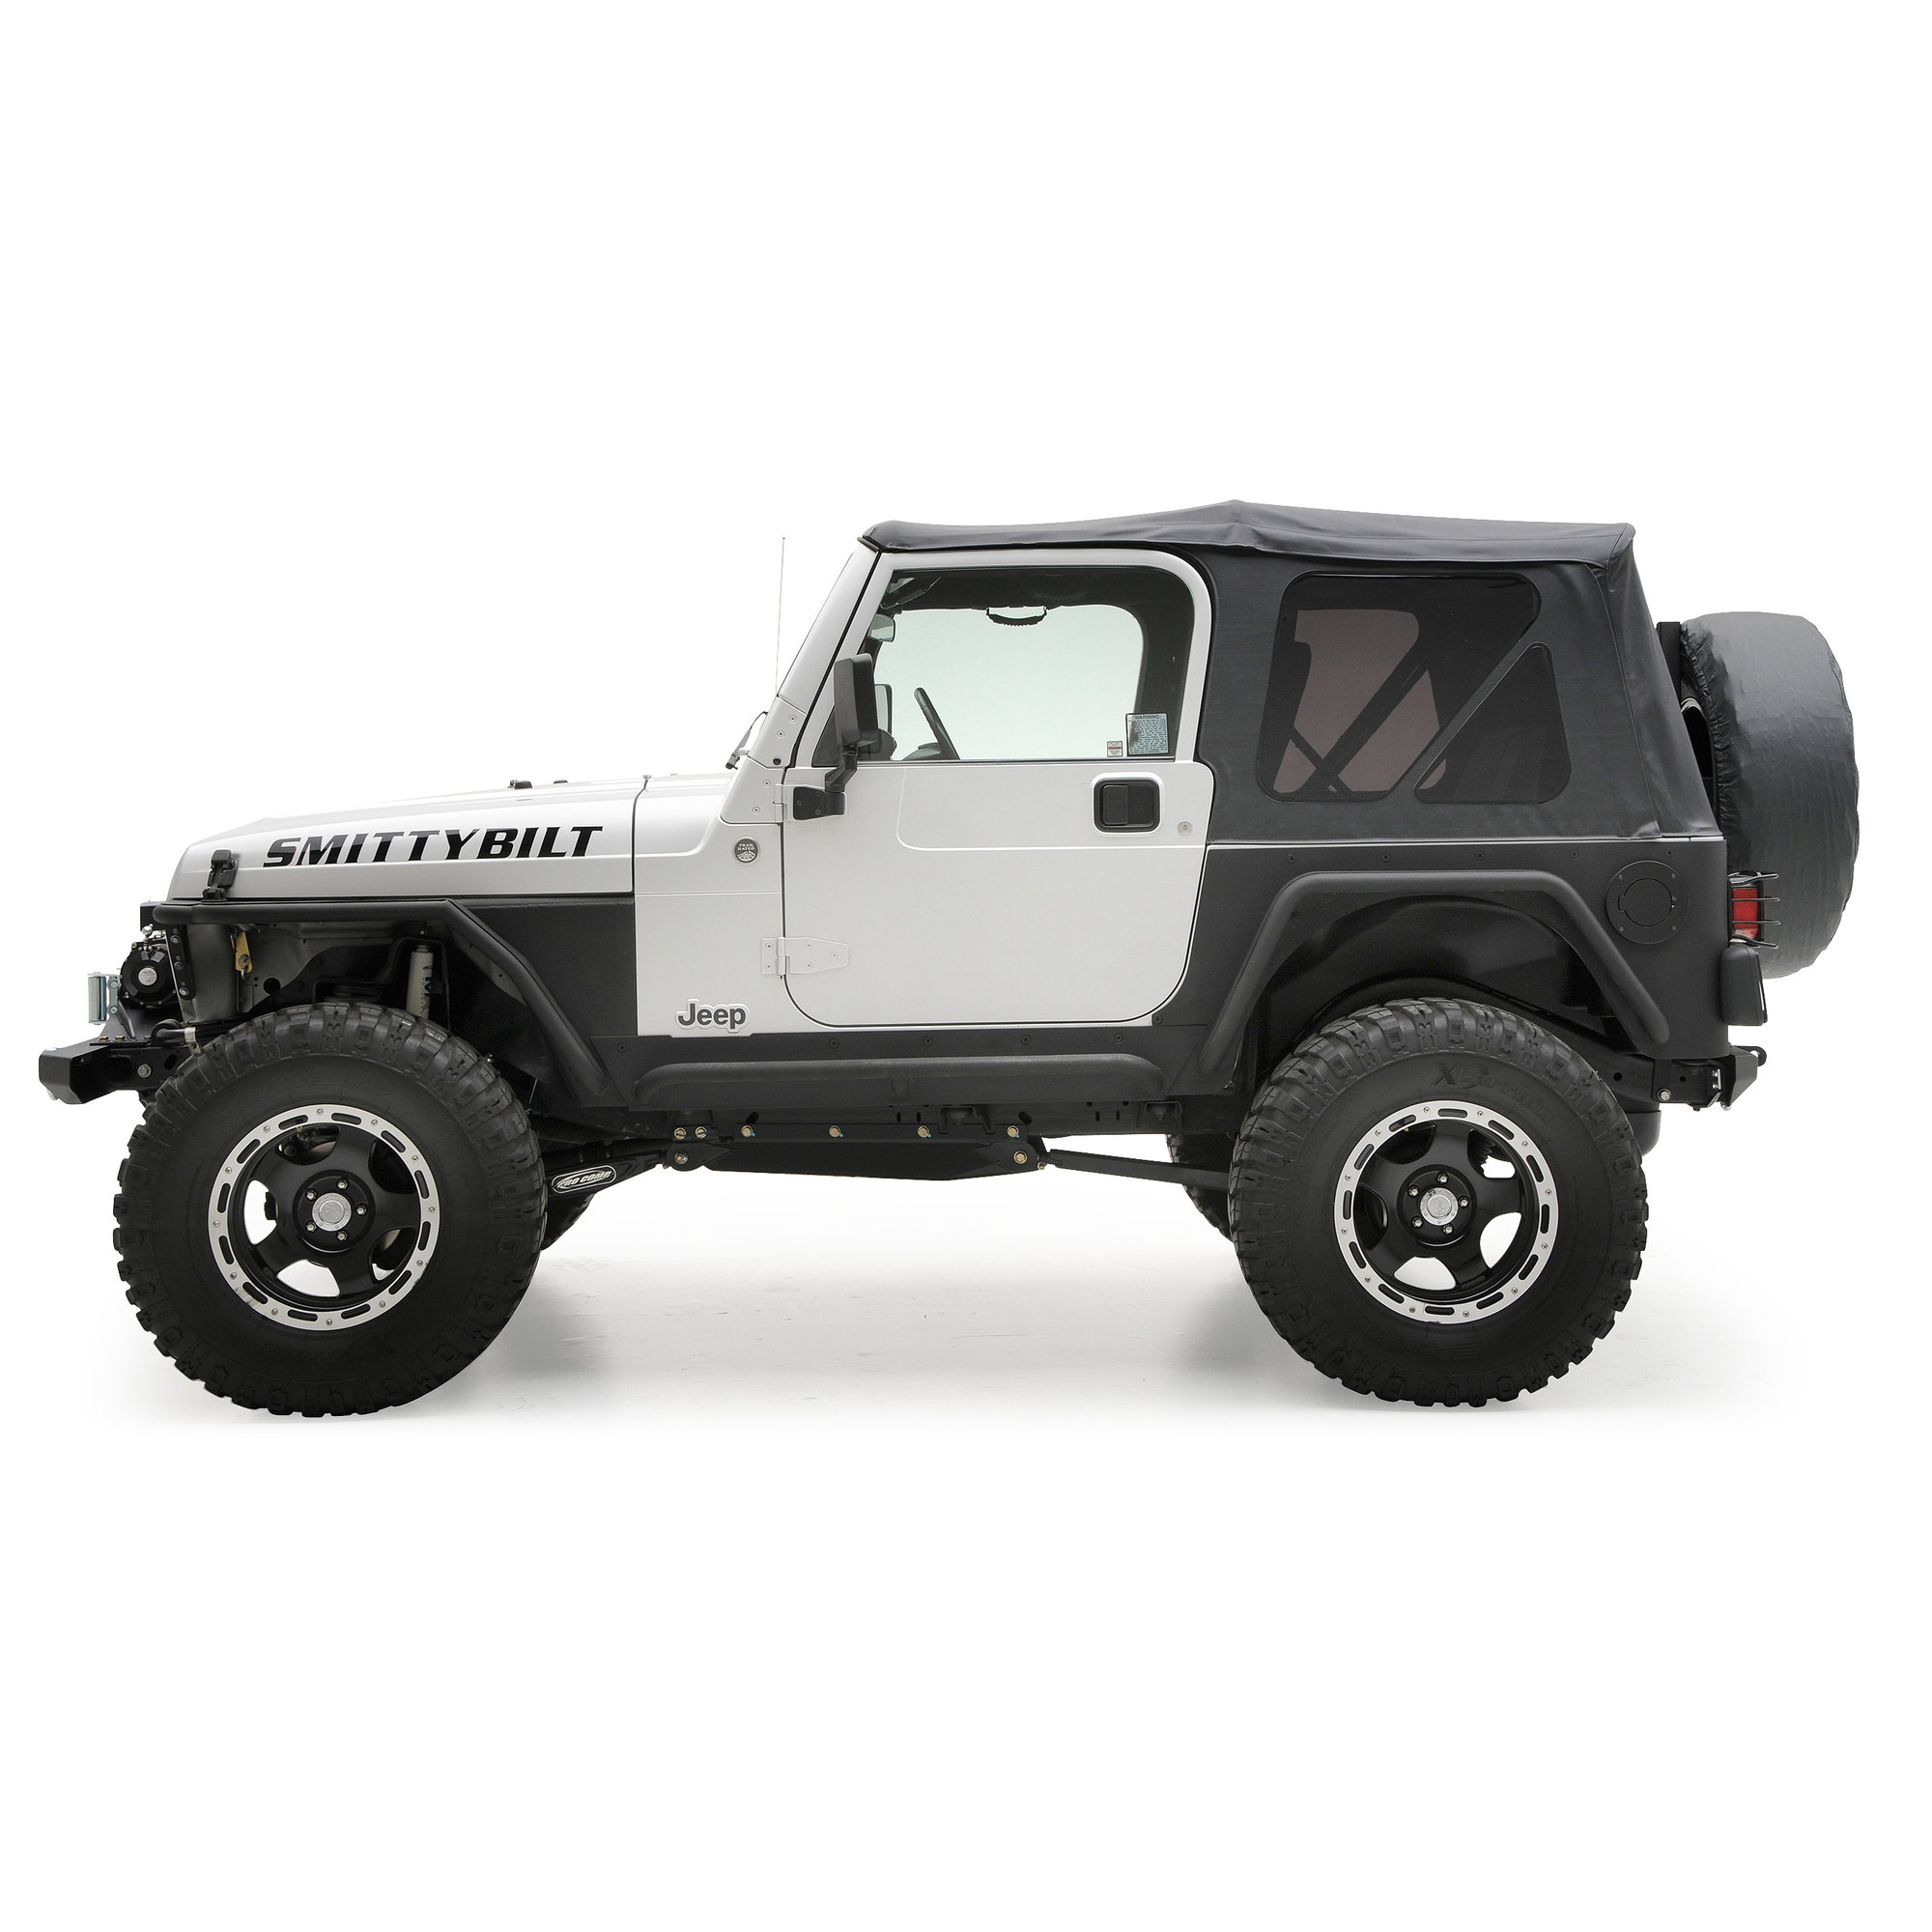 Smittybilt 9971235 Relpacement Soft Top with Tinted Windows & Without Doors  for 97-06 Jeep Wrangler TJ | Quadratec